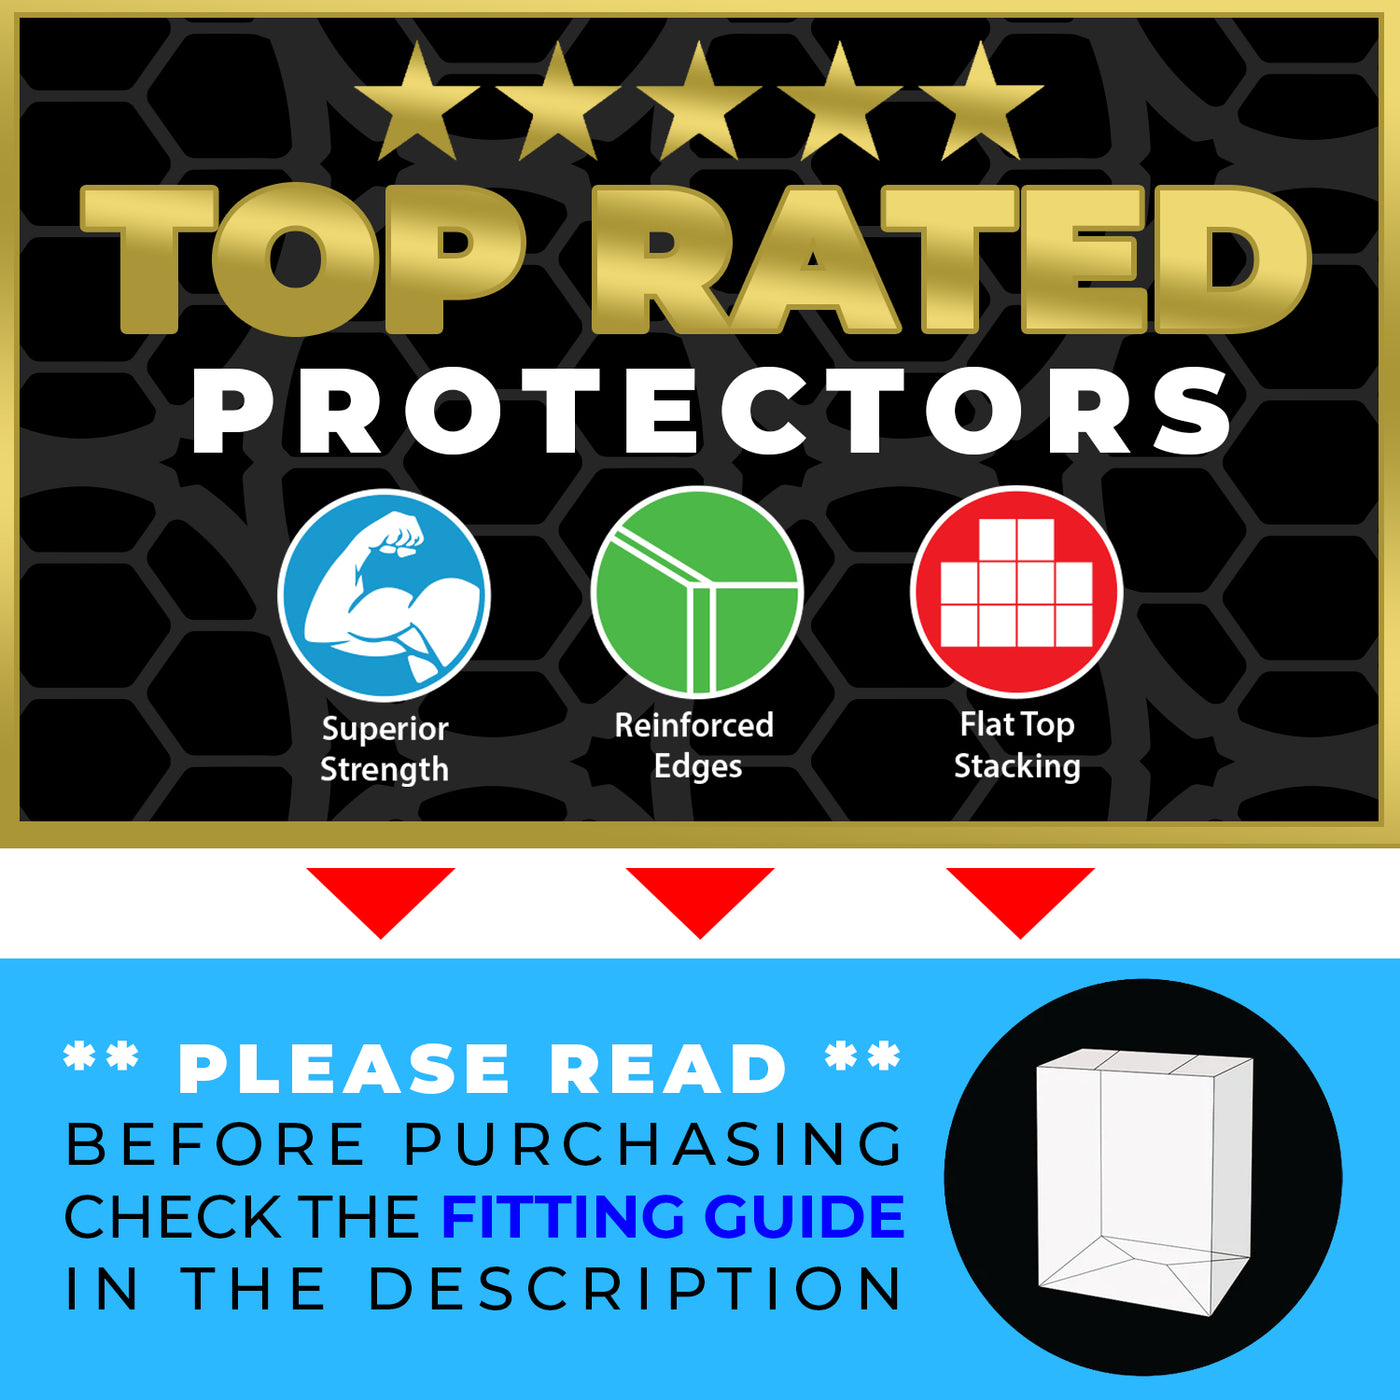 10 inch wide new size best funko pop protectors thick strong uv scratch flat top stack vinyl display geek plastic shield vaulted eco armor fits collect protect display case kollector protector